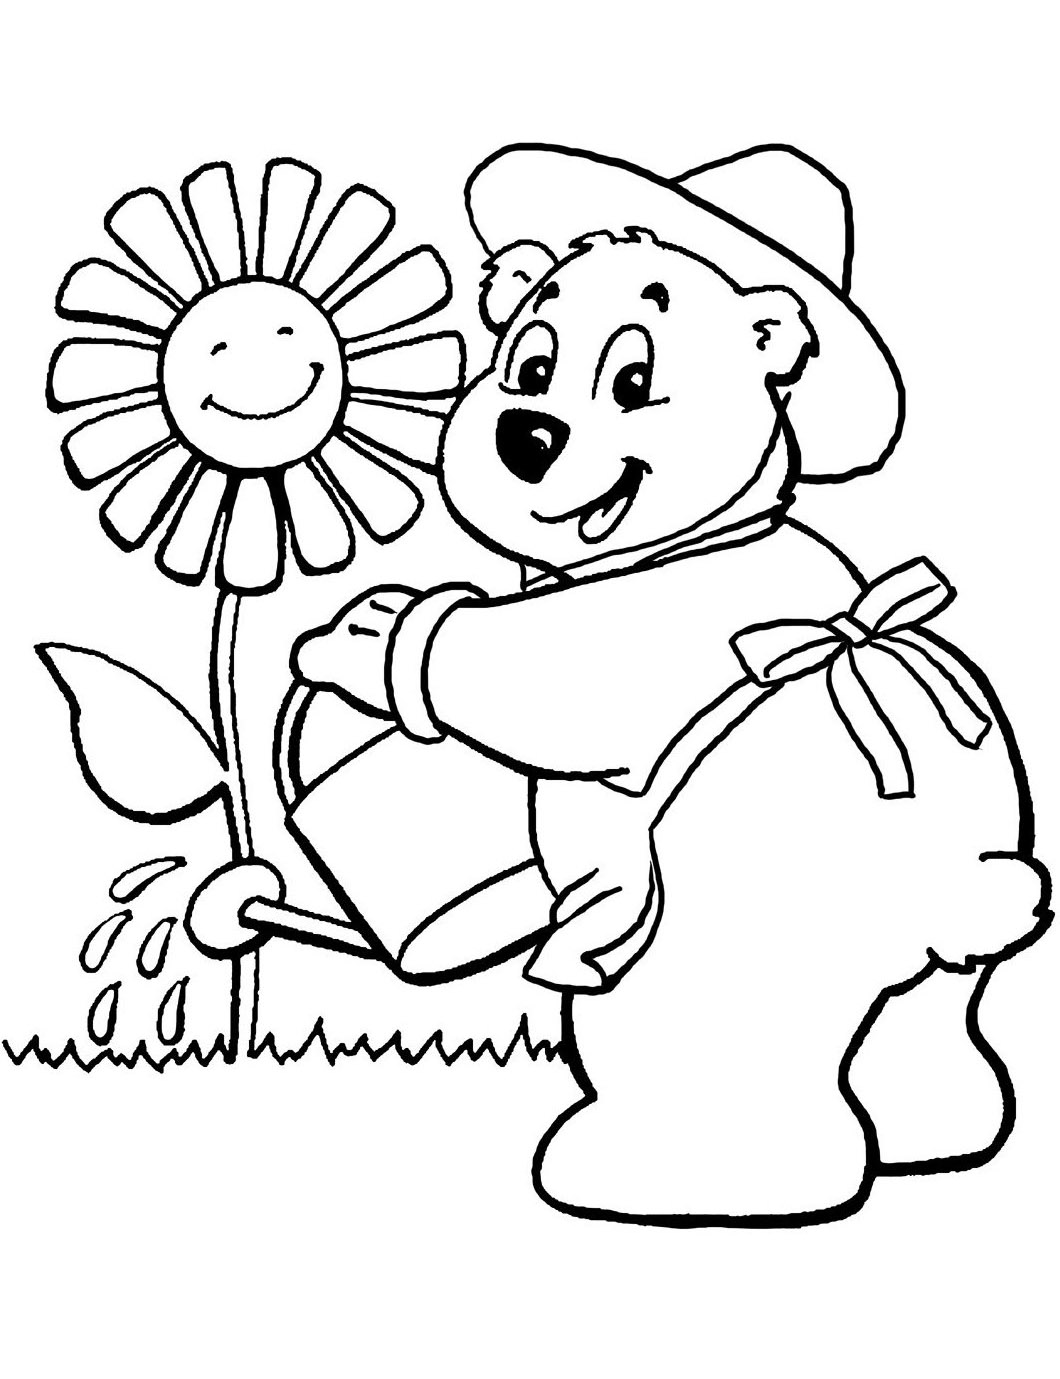 Beautiful Bears coloring page to print and color